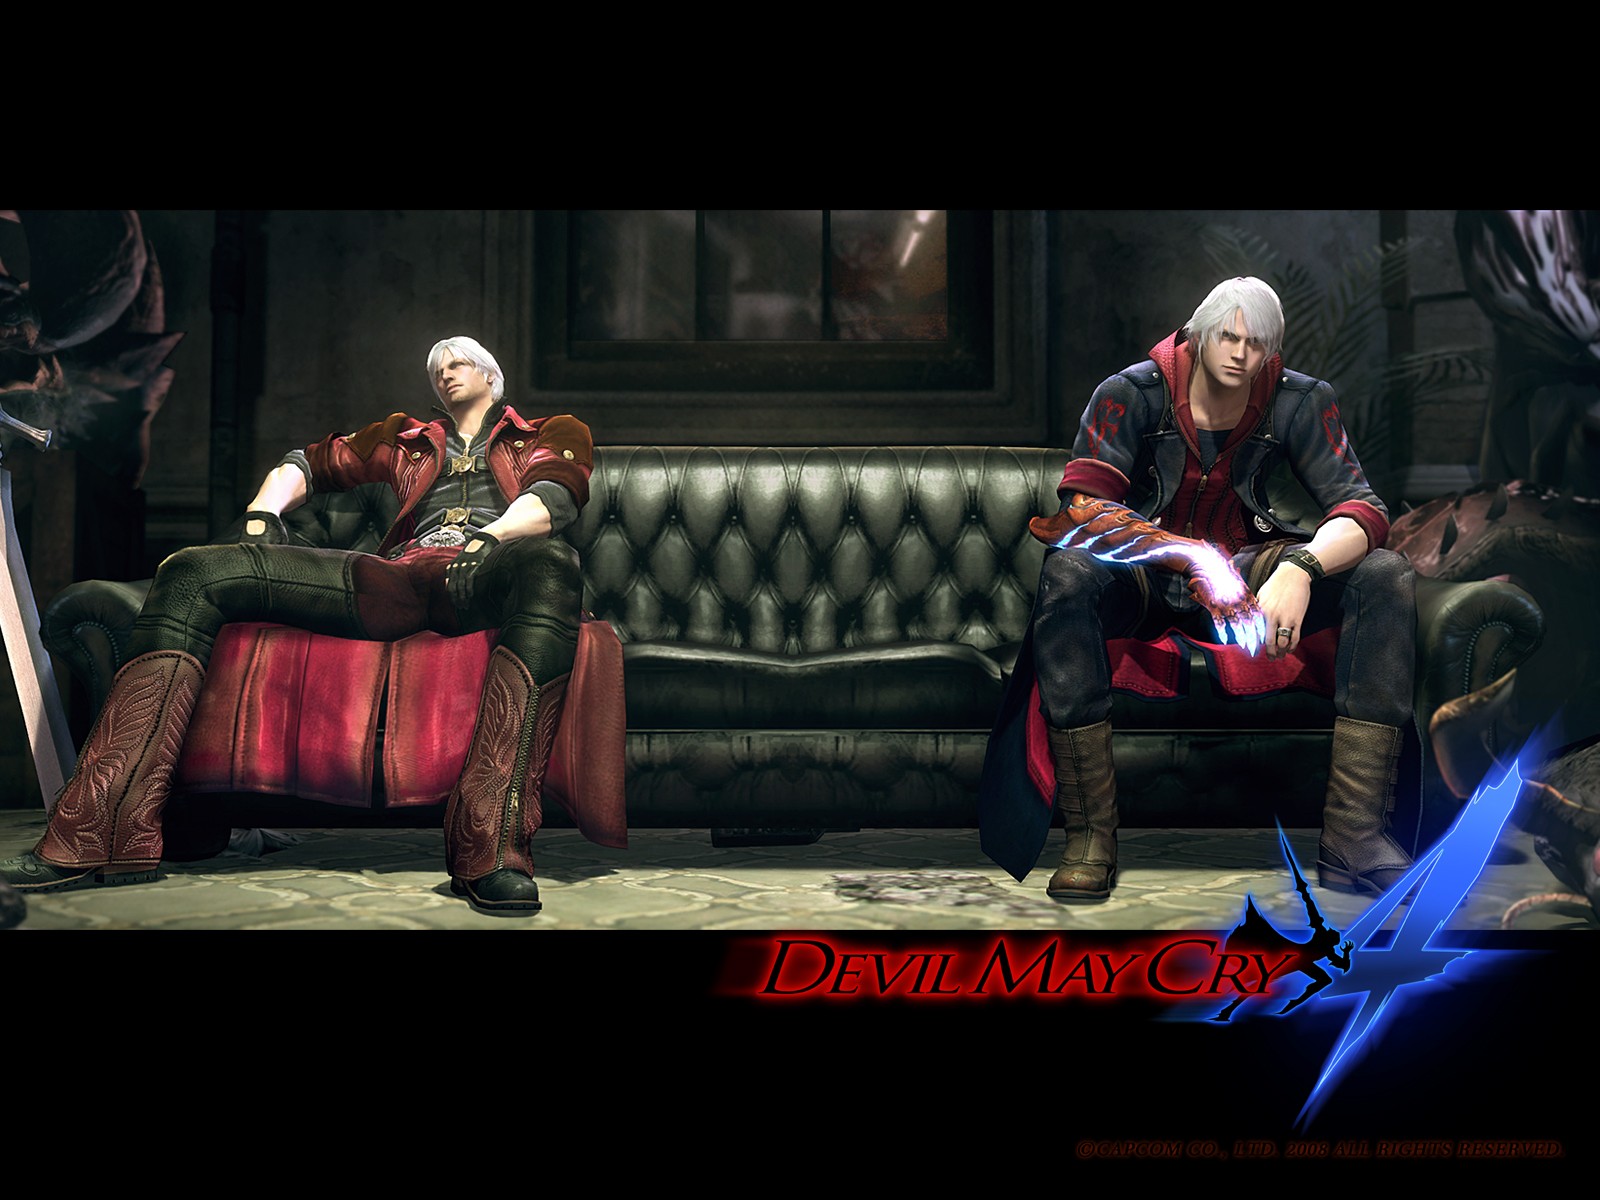 Devil May Cry 4 #21